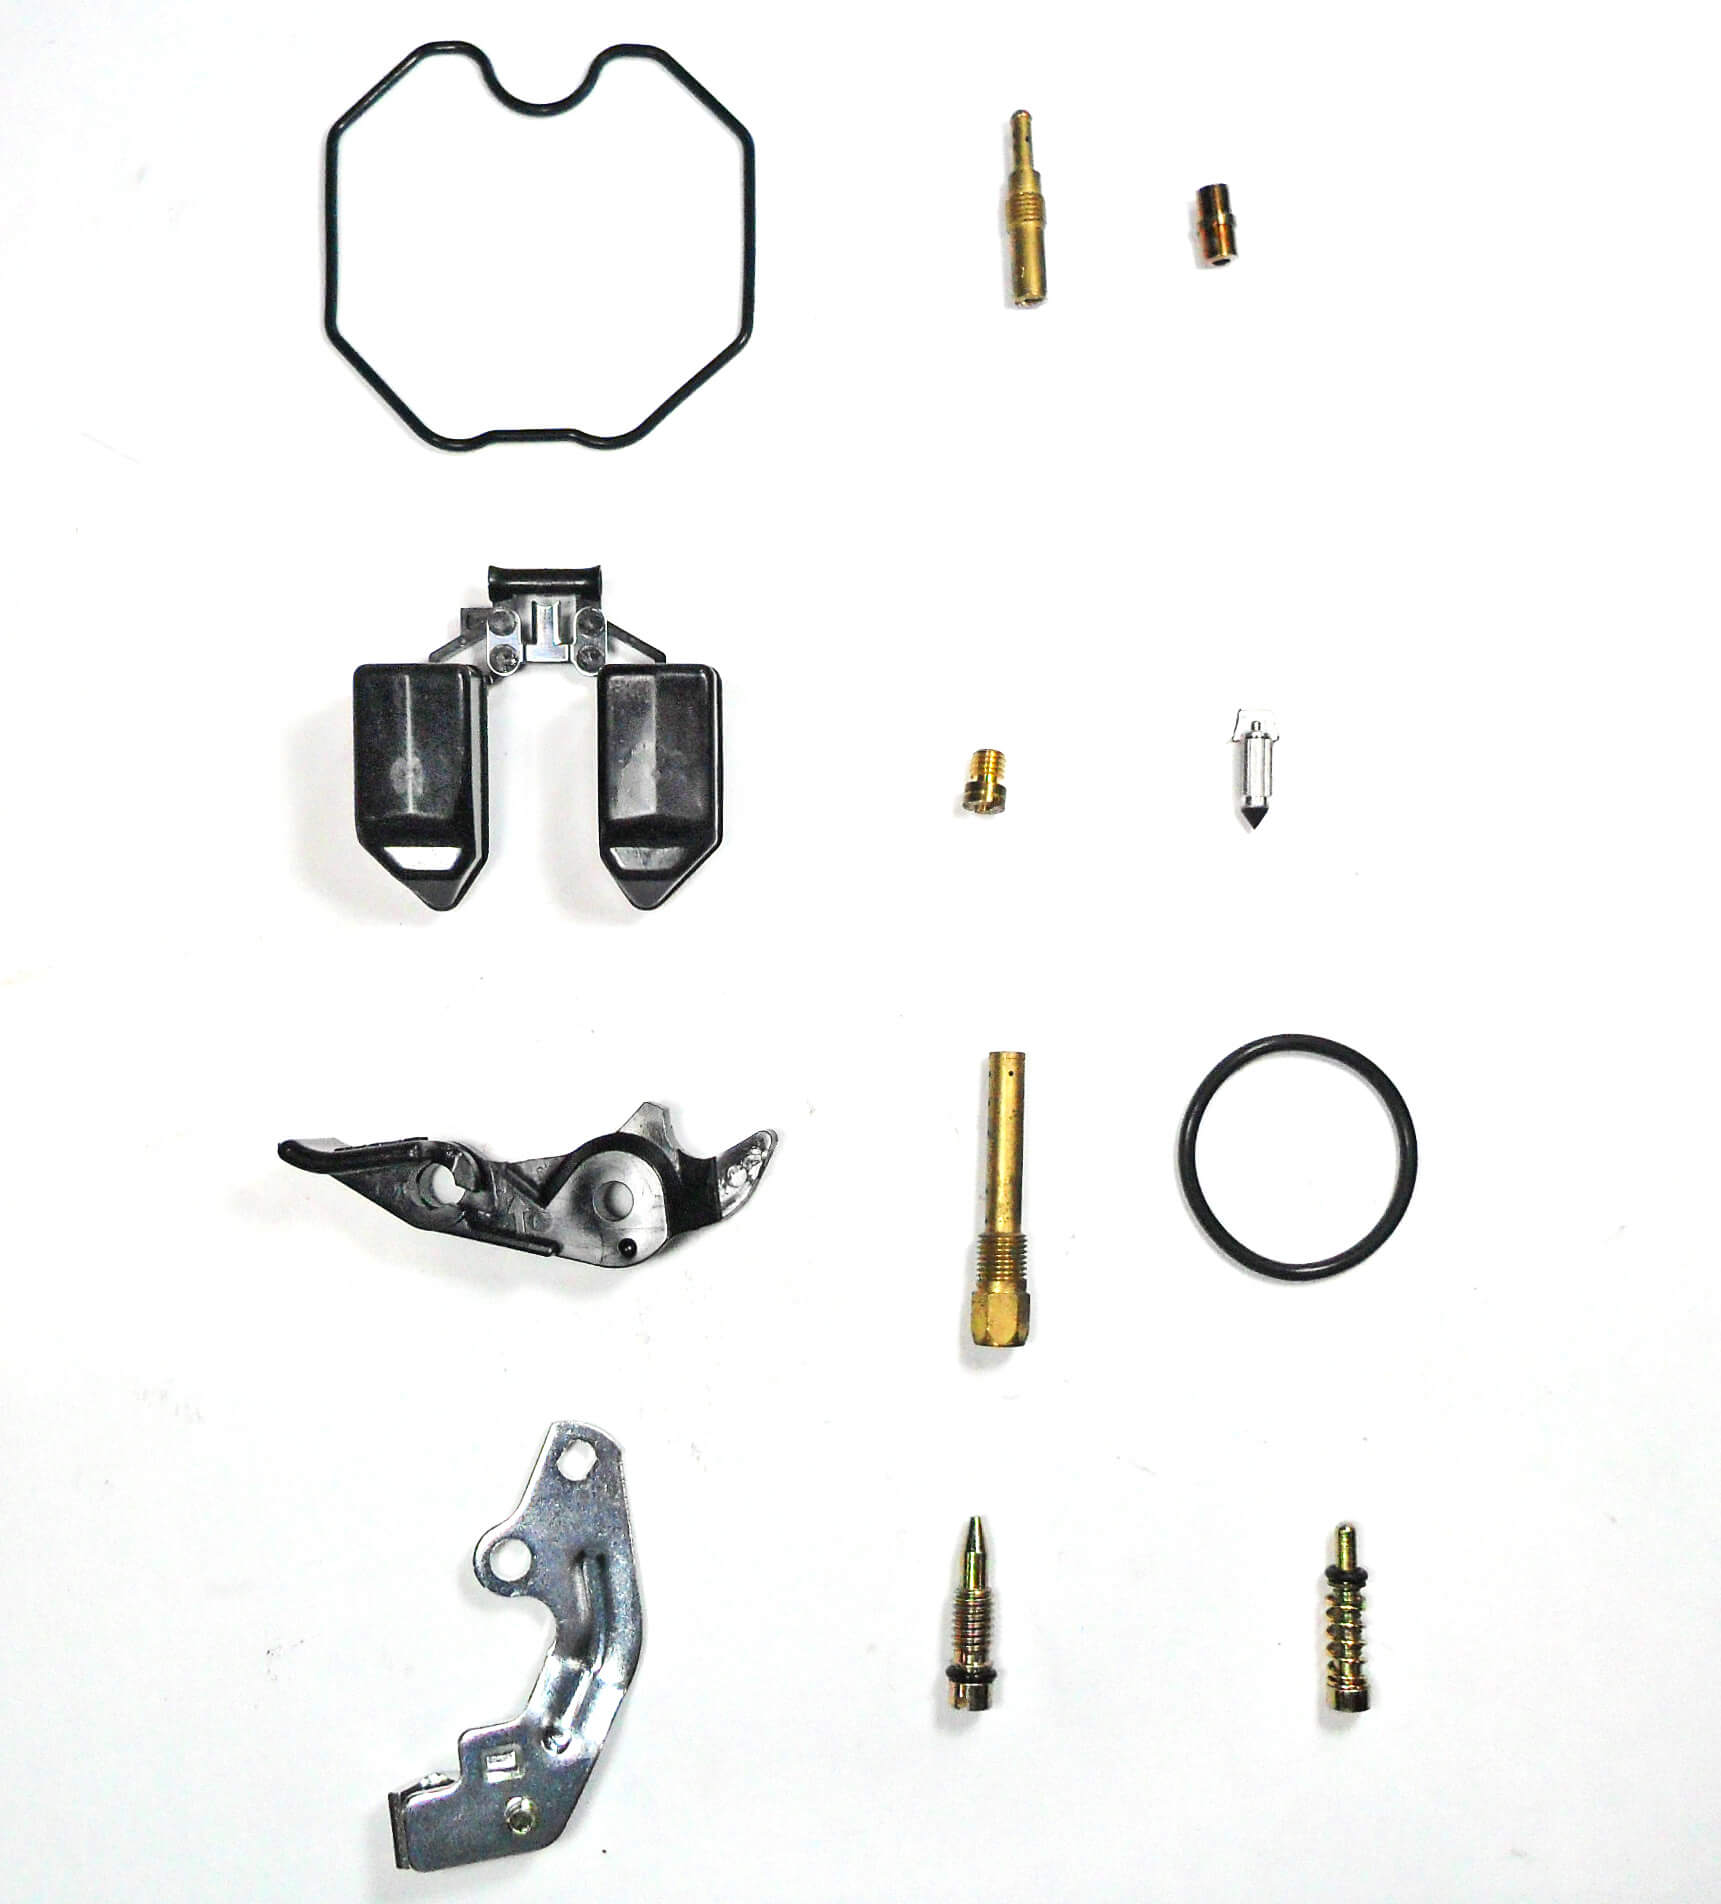 250cc PZ27 Carburetor Kit with a #110 Main Jet. For 250cc E-Ton Vector ATV and others